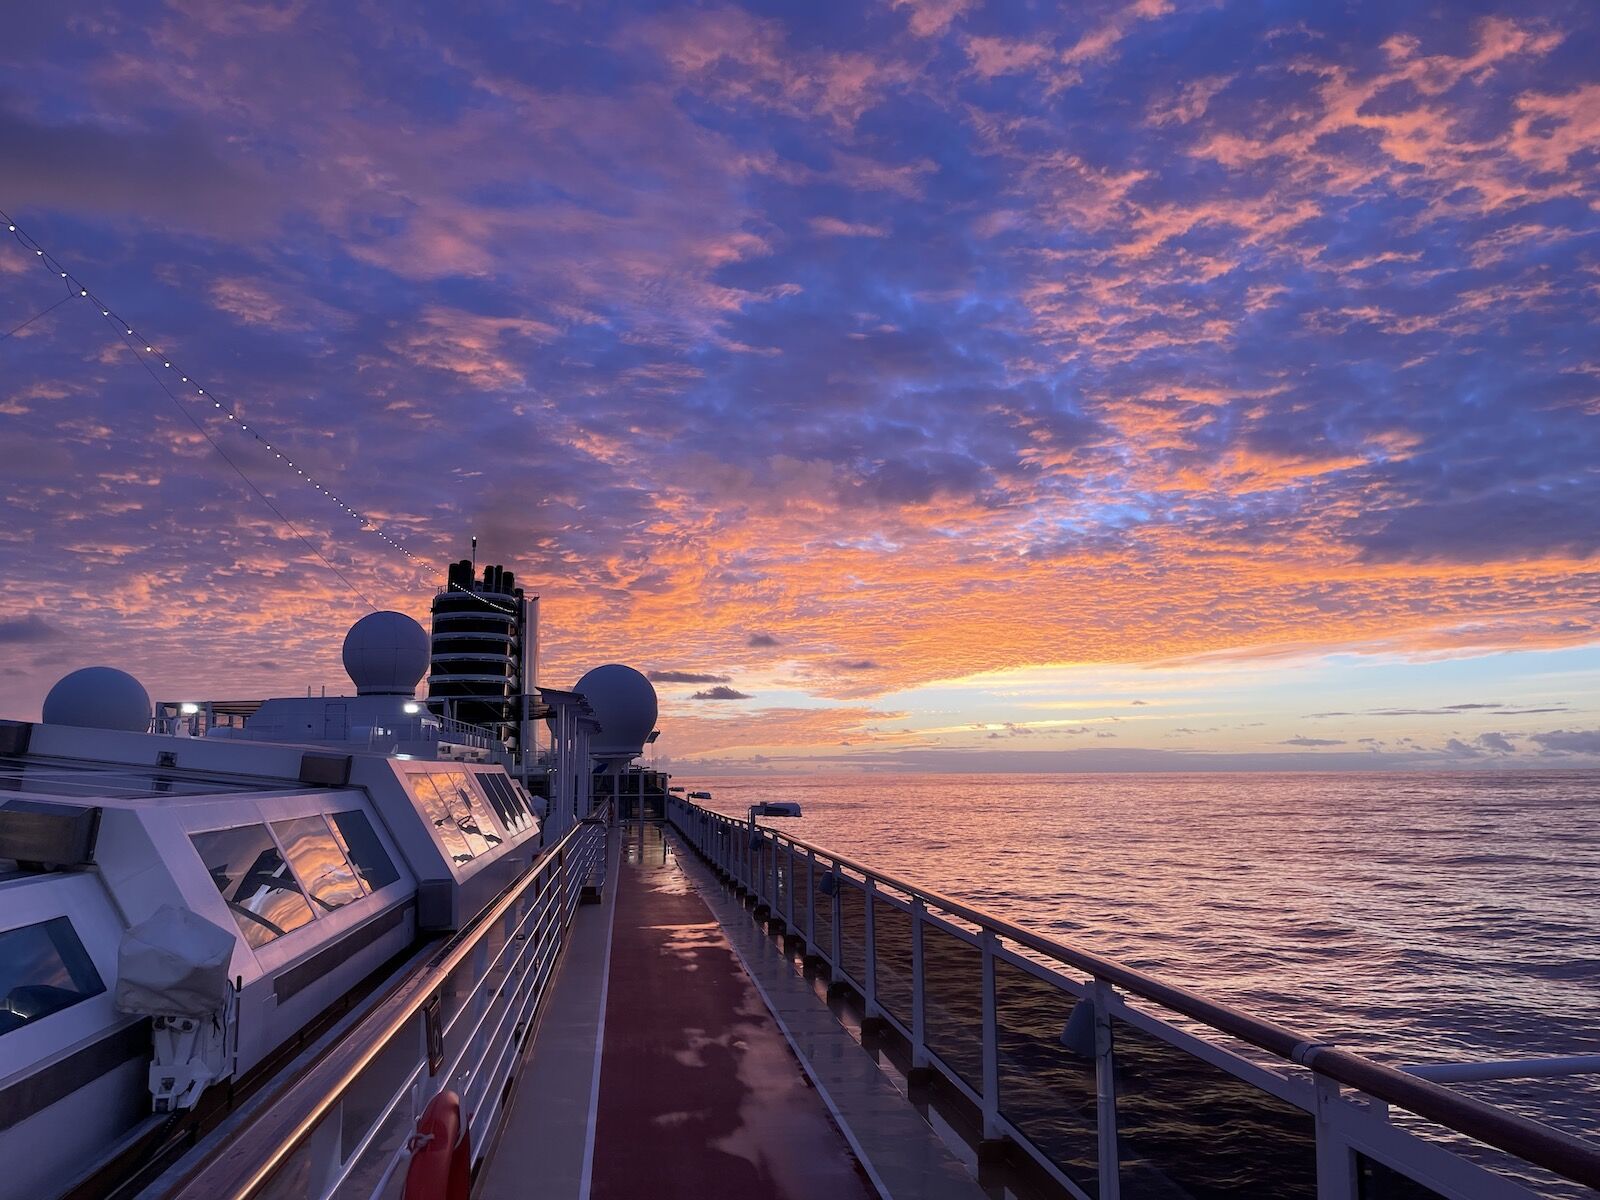 Sunset over the Atlantic Ocean during a transatlantic cruise with Holland America